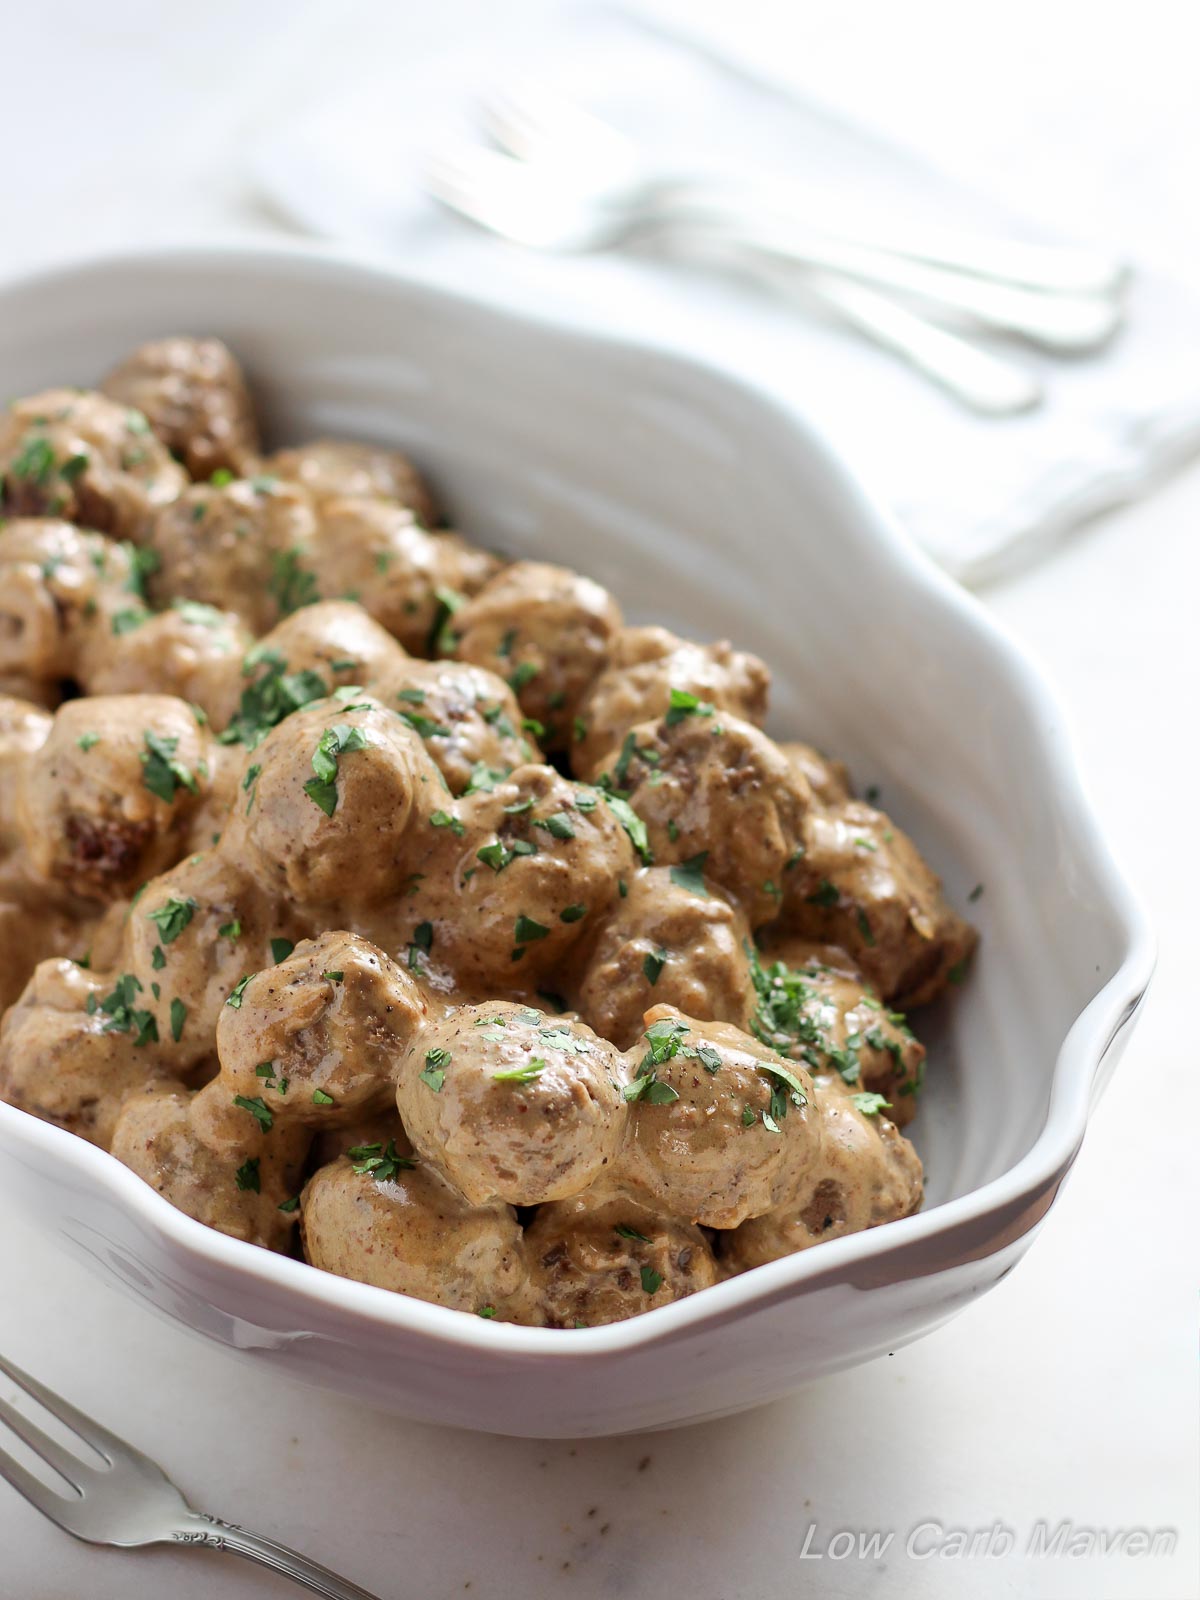 Low Carb Swedish Meatballs - great as an appetizer or a meal served over zoodles! | lowcarb, gluten-free, keto, thm | LowCarbMaven.com